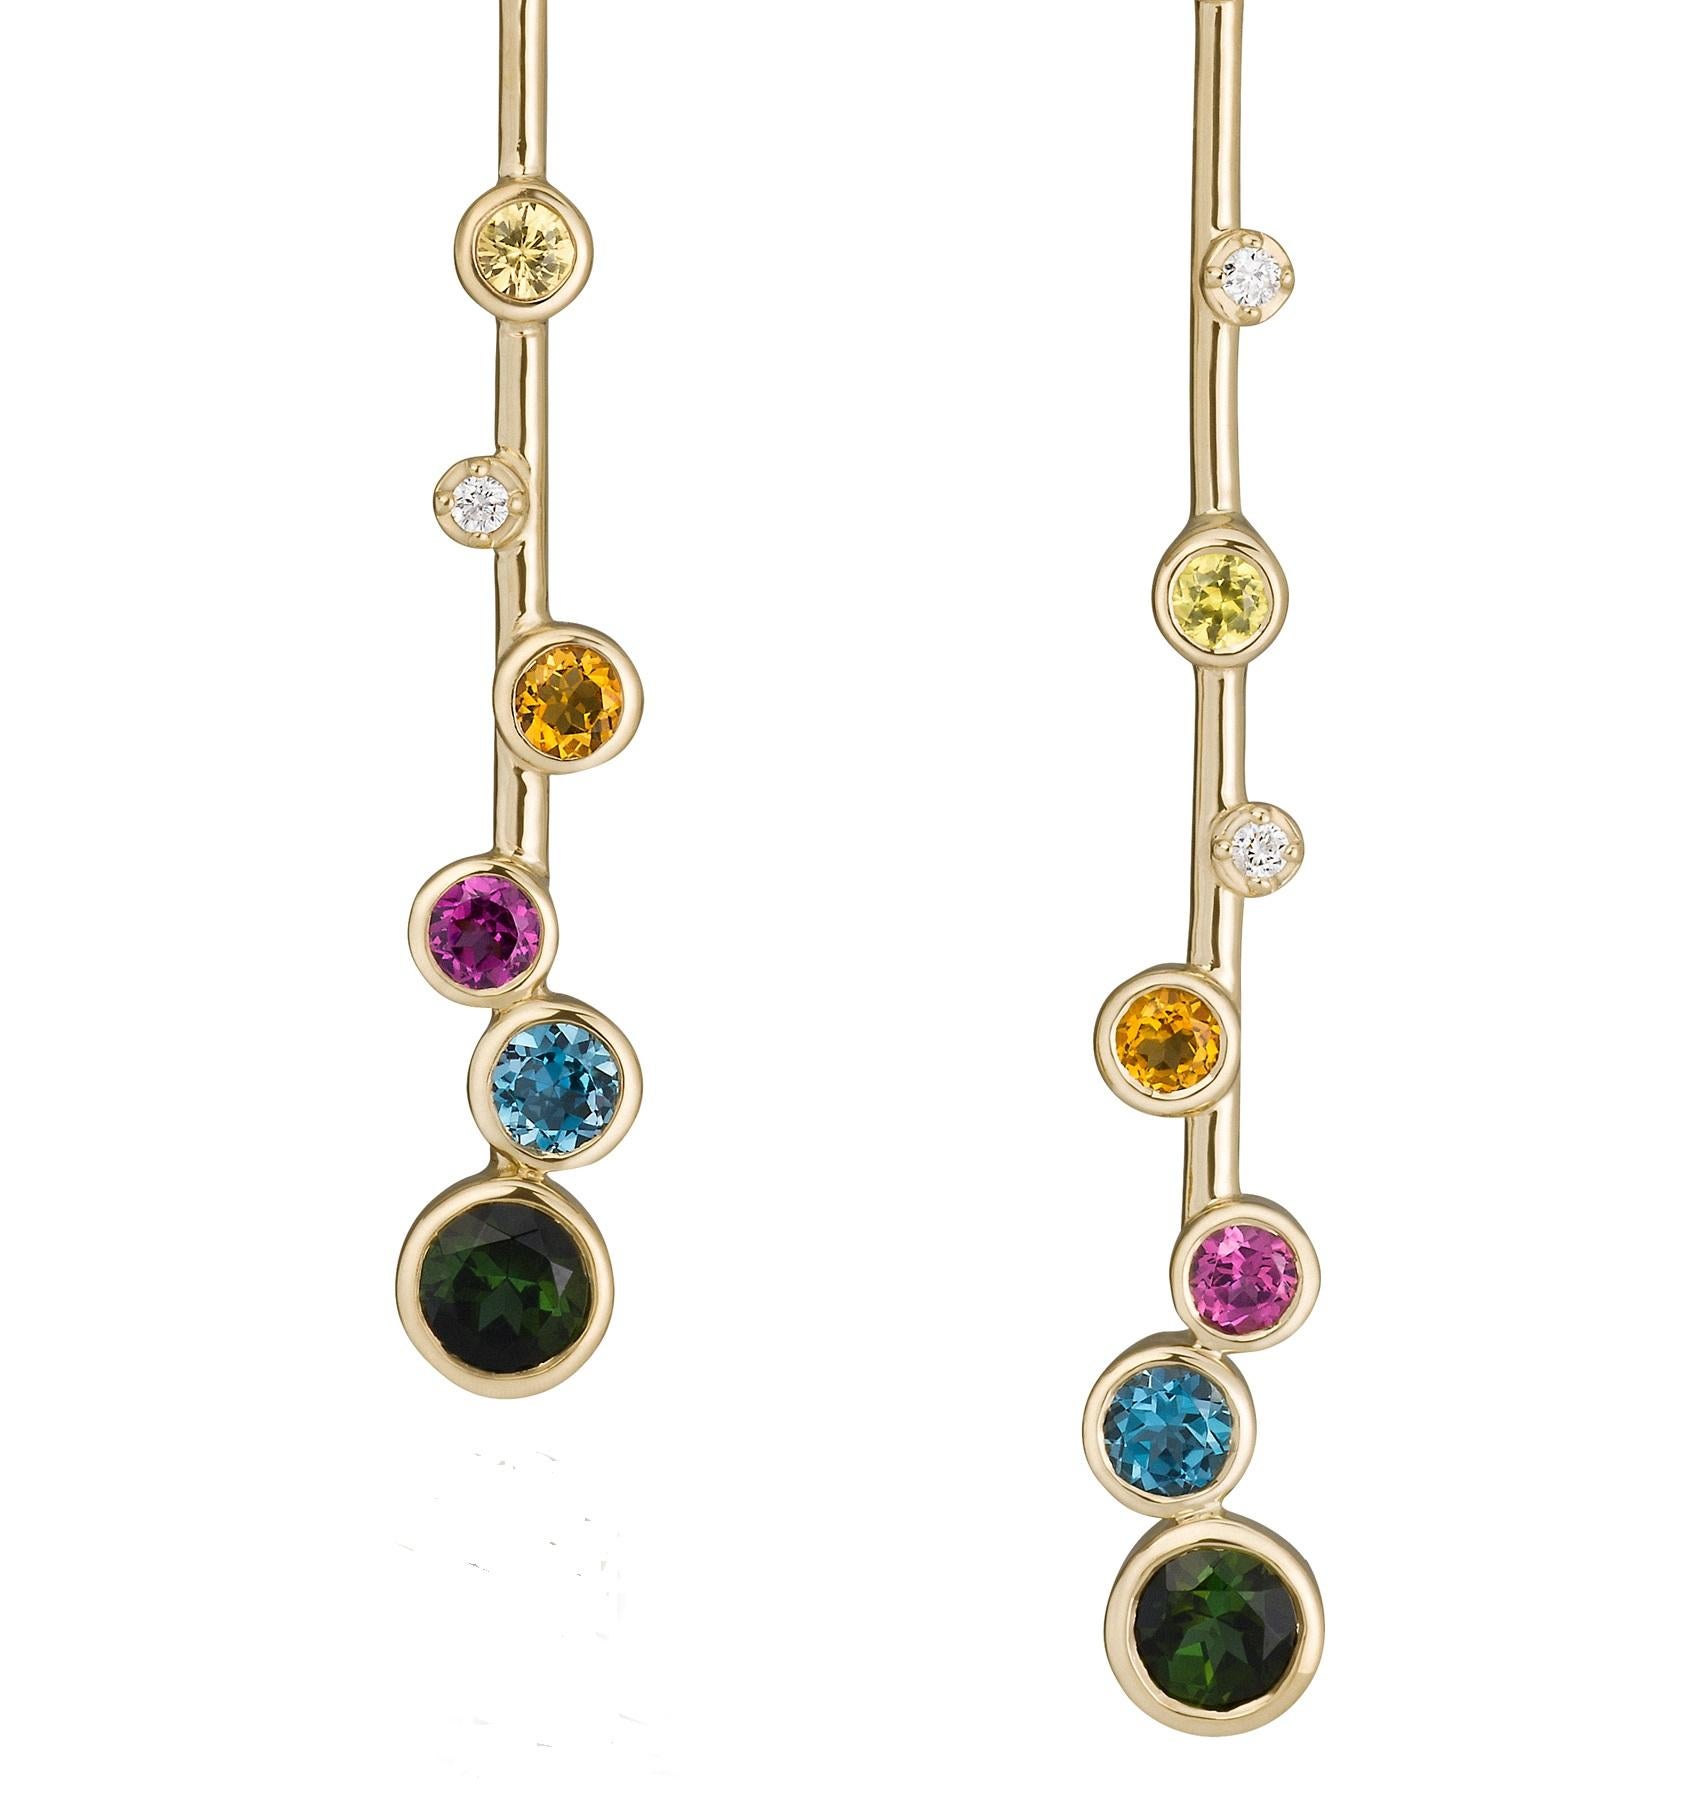 Make everyday a special day! Don't keep these earrings in your lock box - these are meant to be worn!!! They will go with almost all your outfits and they make everyday feel like a celebration of color and sparkle. Who doesn't want to feel like a